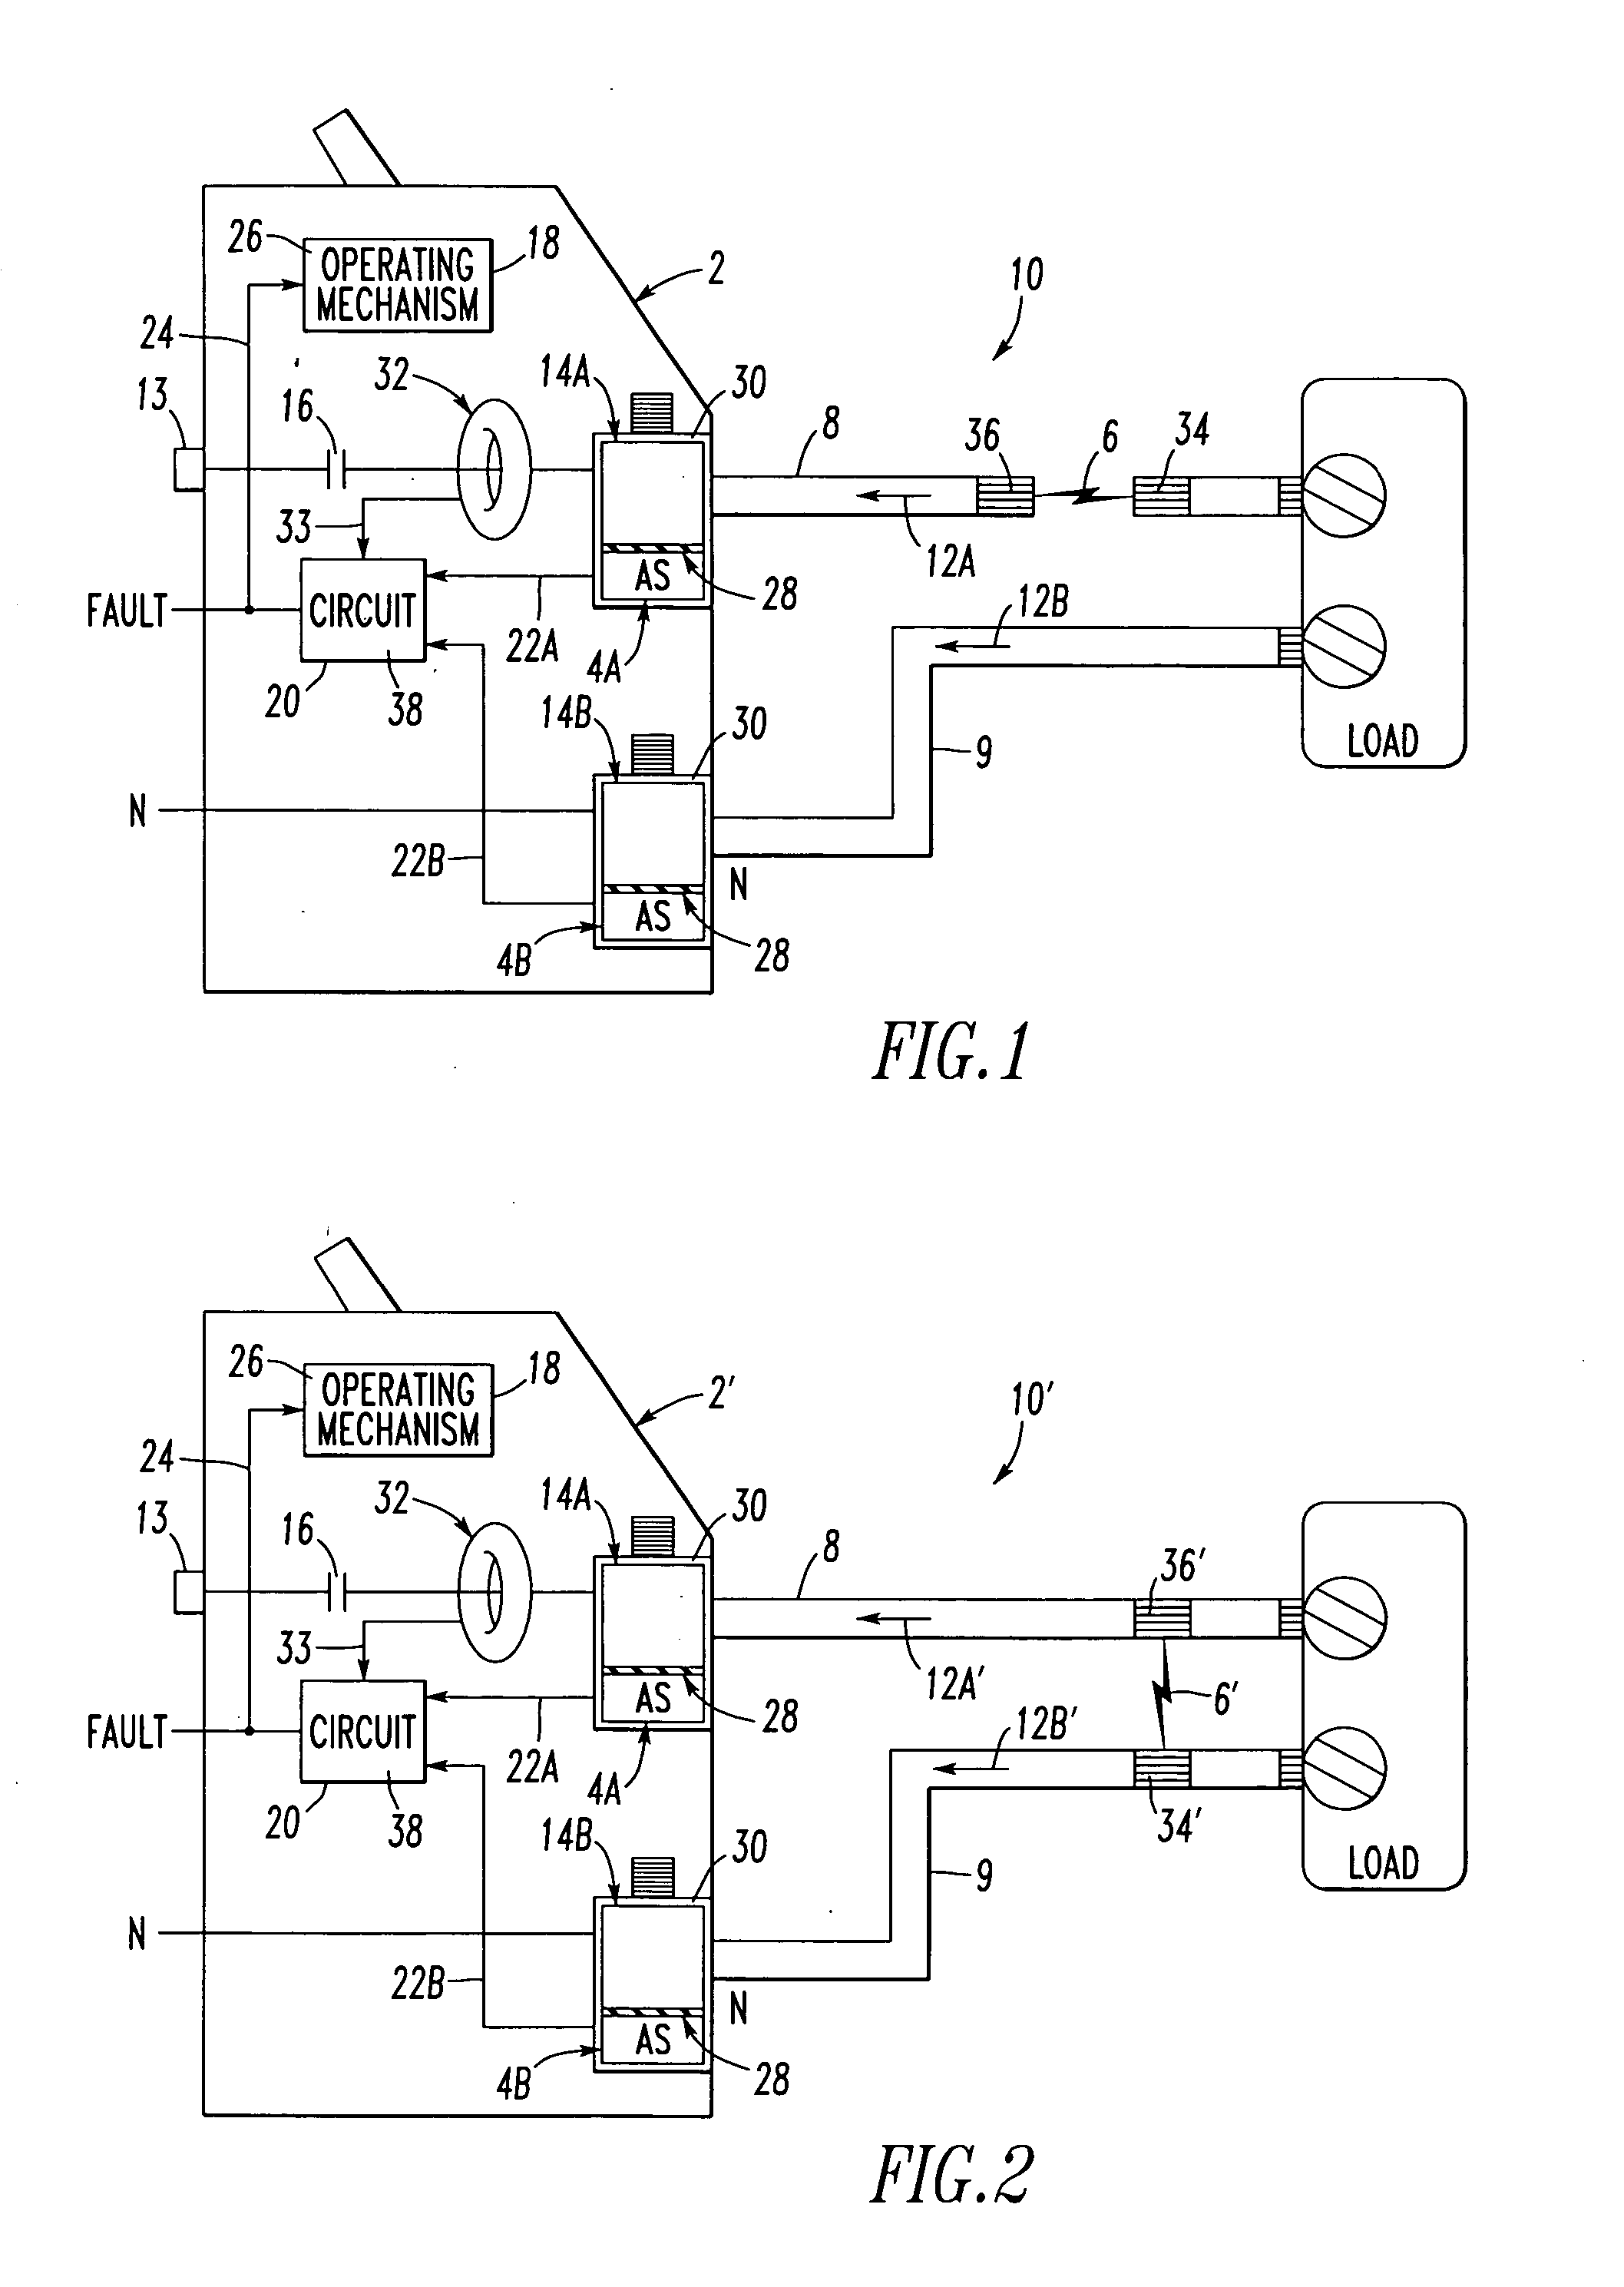 Electrical switching apparatus and method employing acoustic and current signals to distinguish between parallel and series arc faults